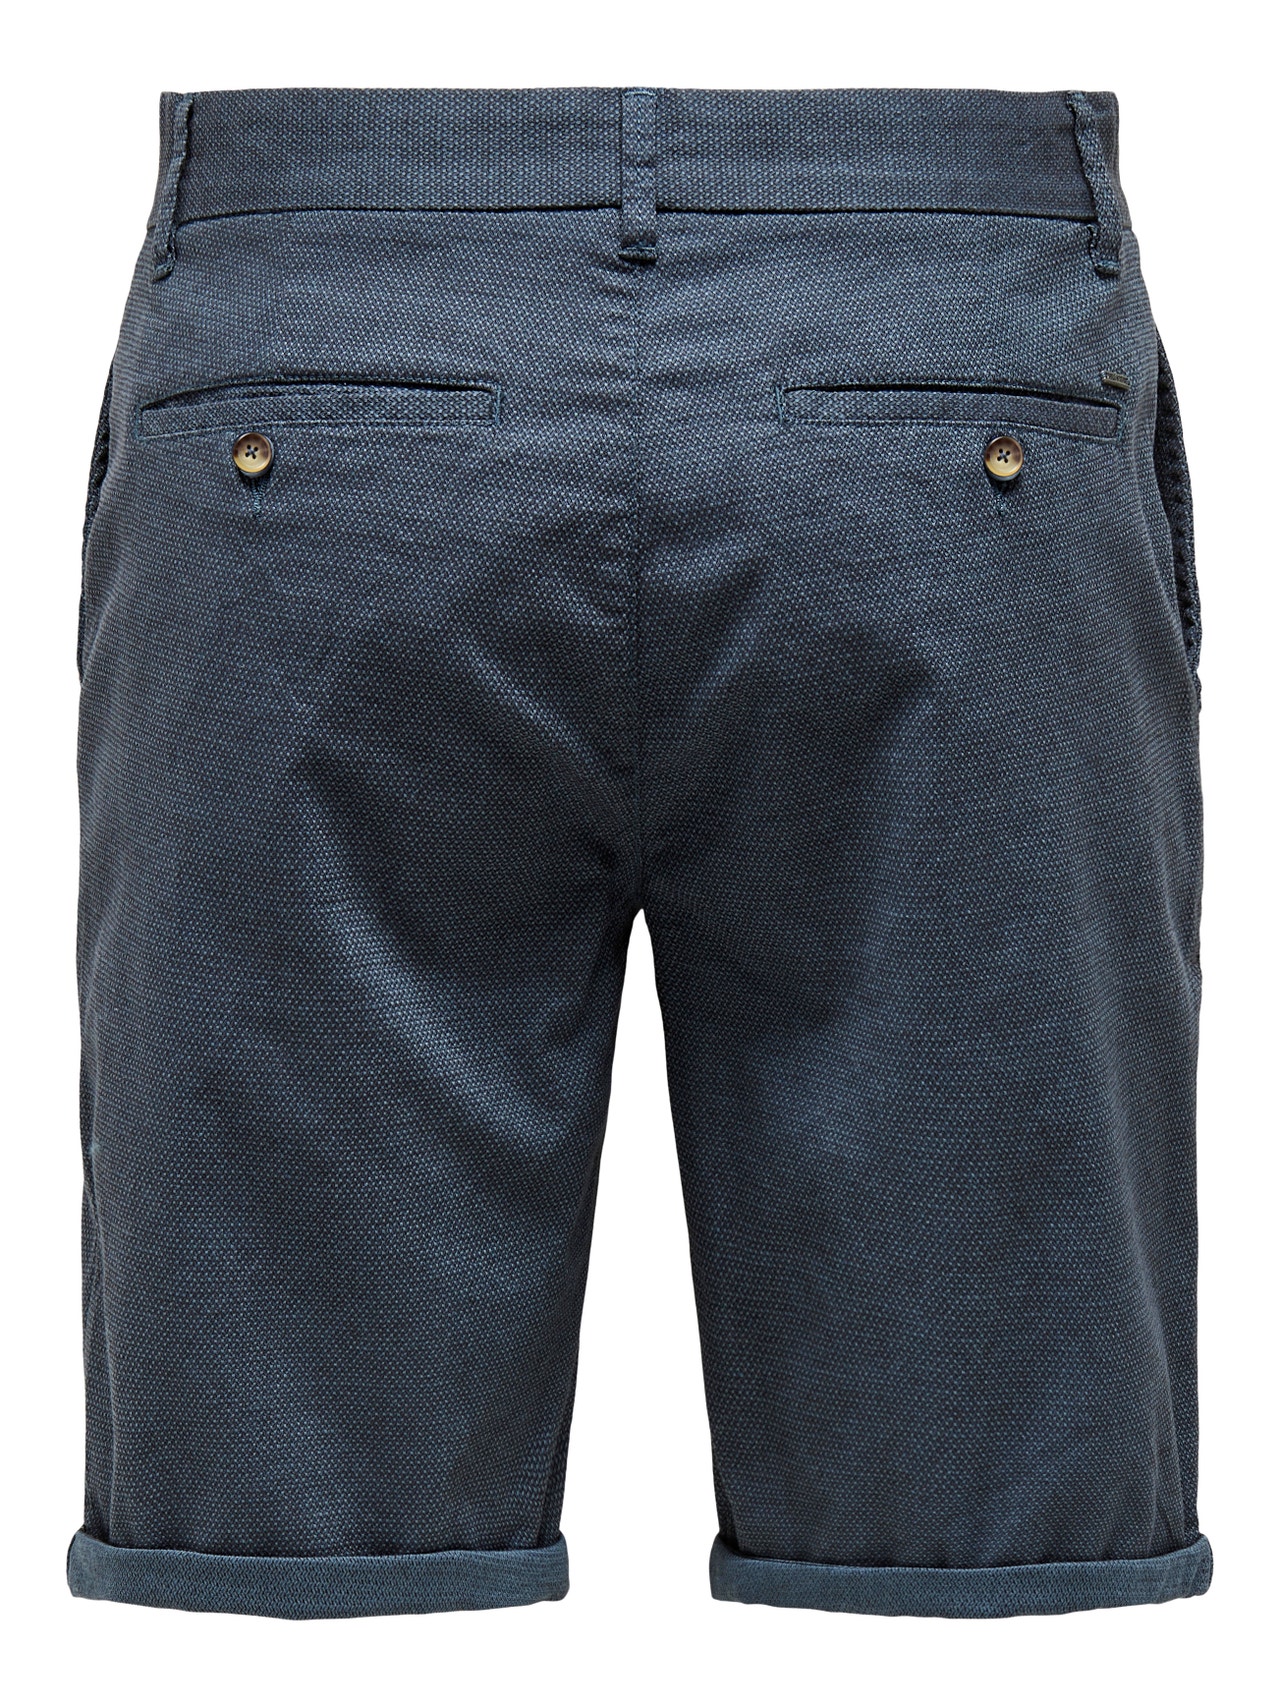 ONLY & SONS Normal passform Shorts -Bering Sea - 22028336